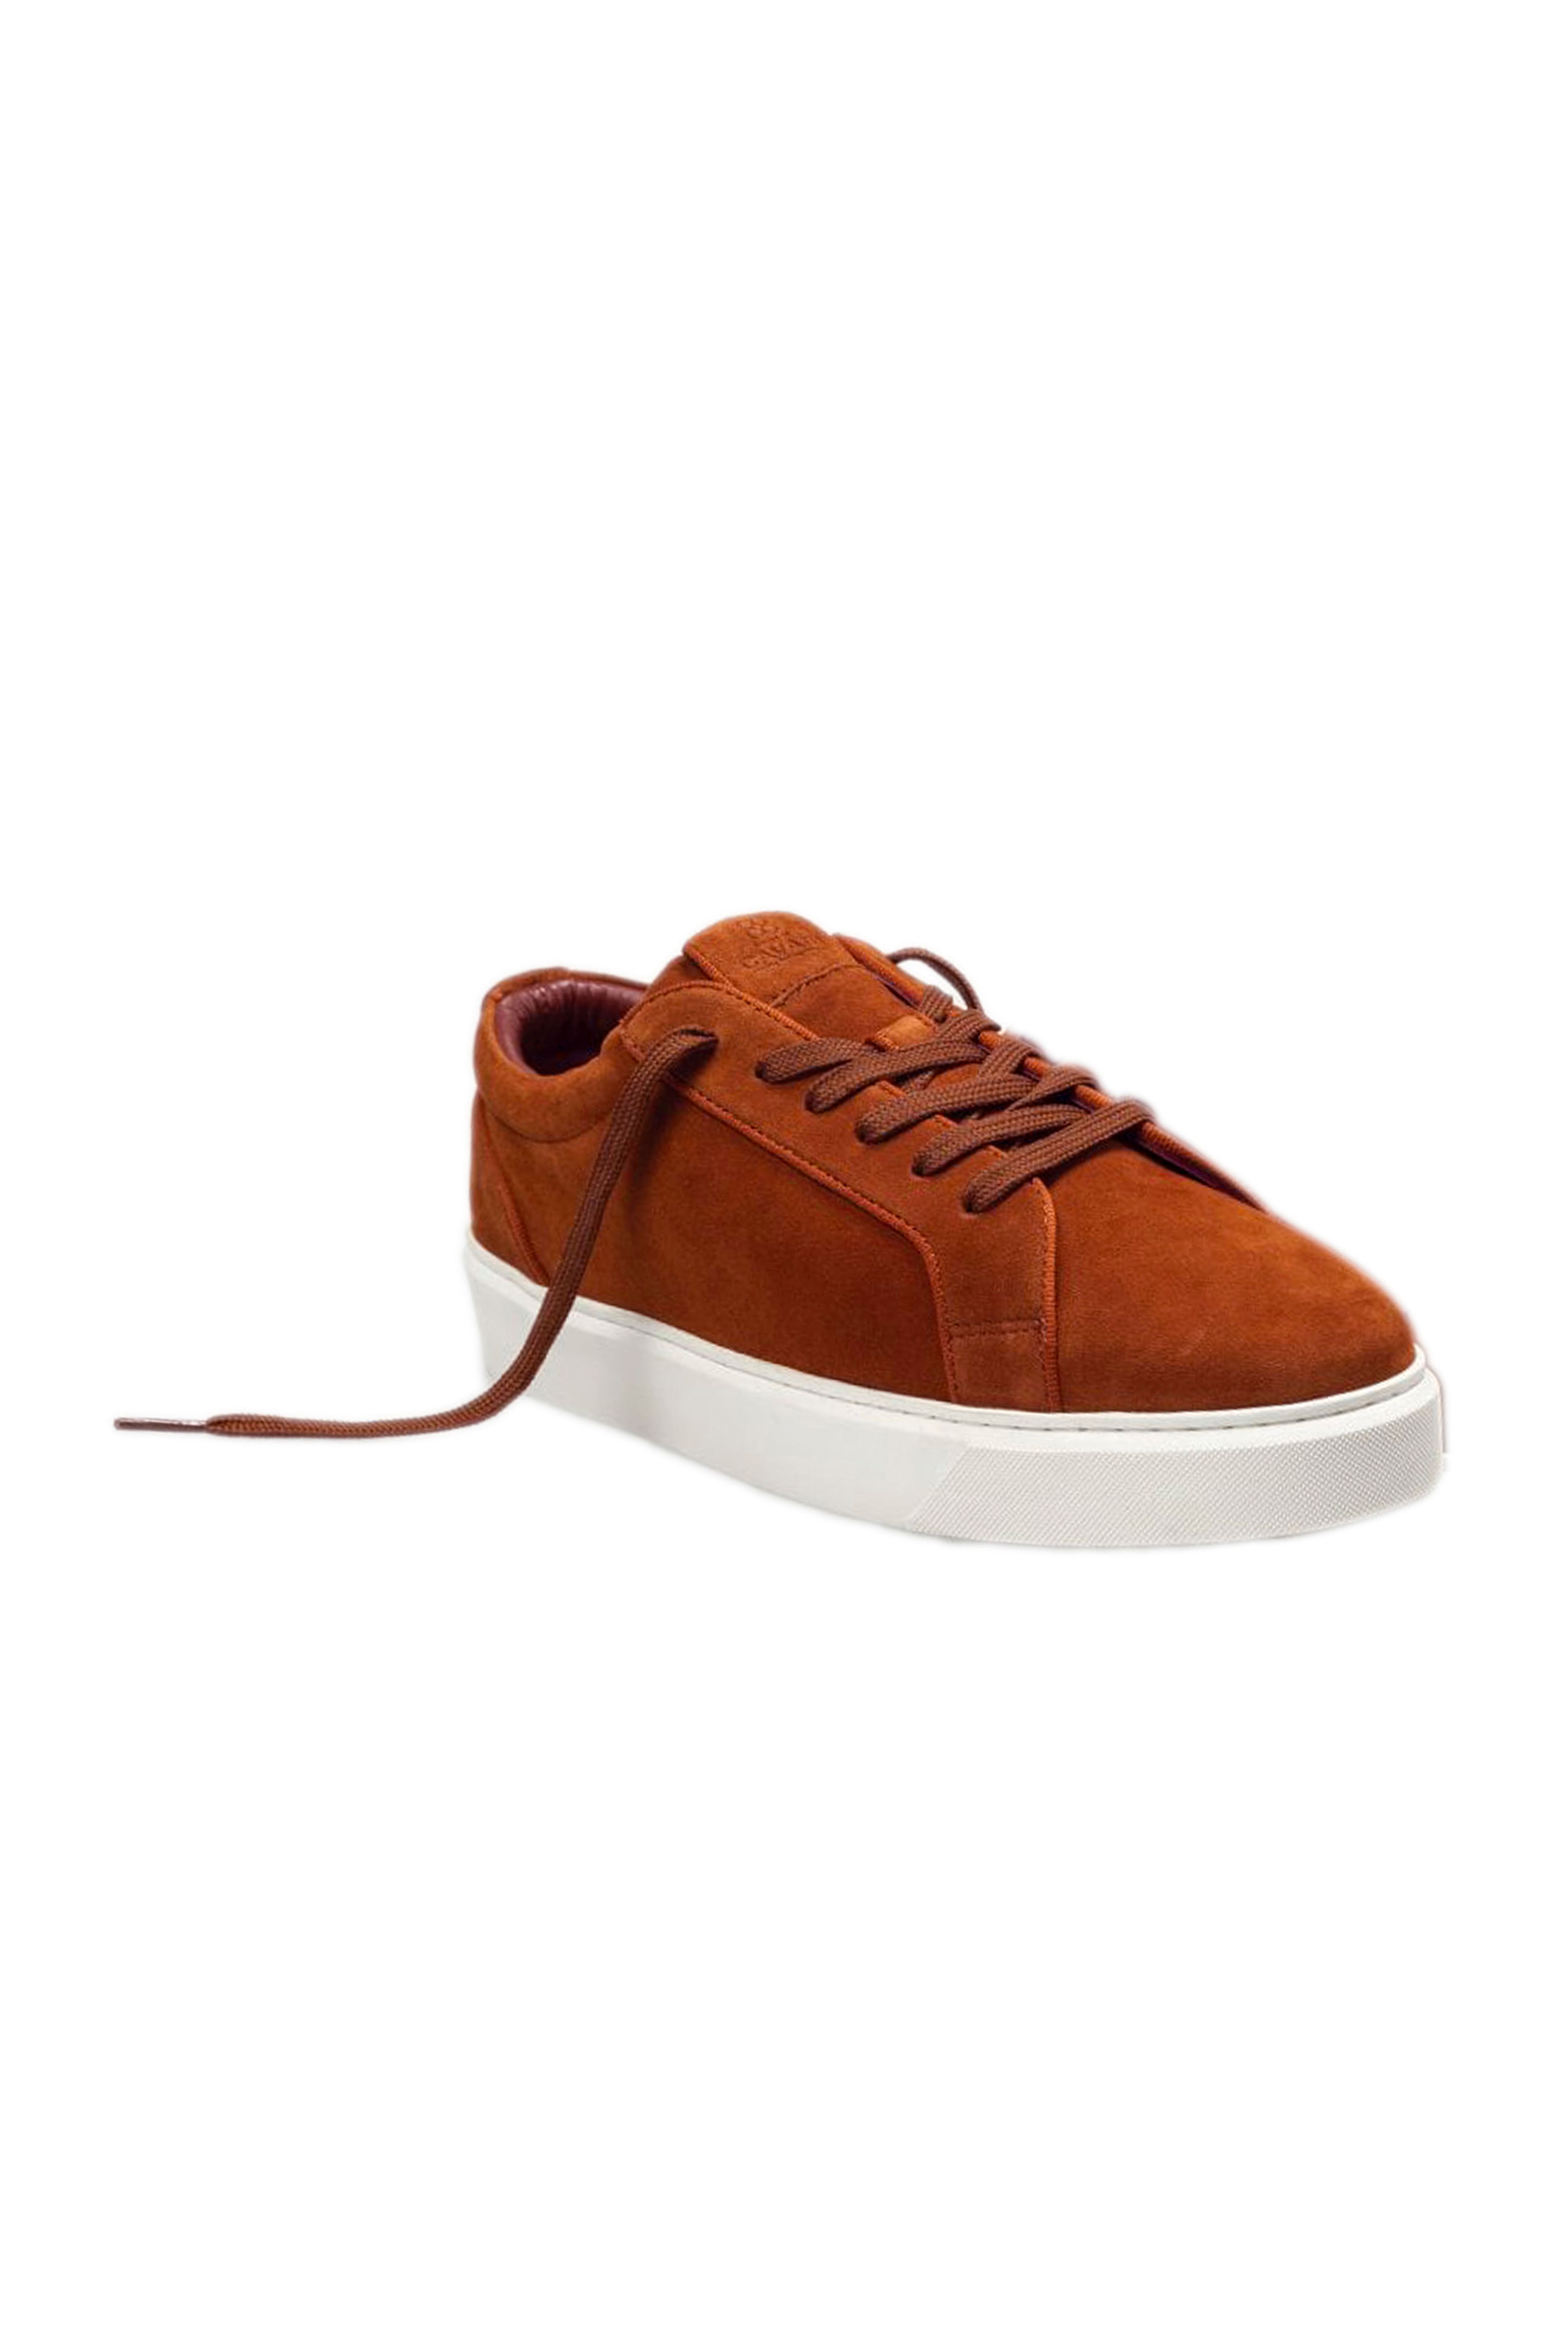 Men's Thick Rubber Sole Lace Up Sneakers - Rust Brown